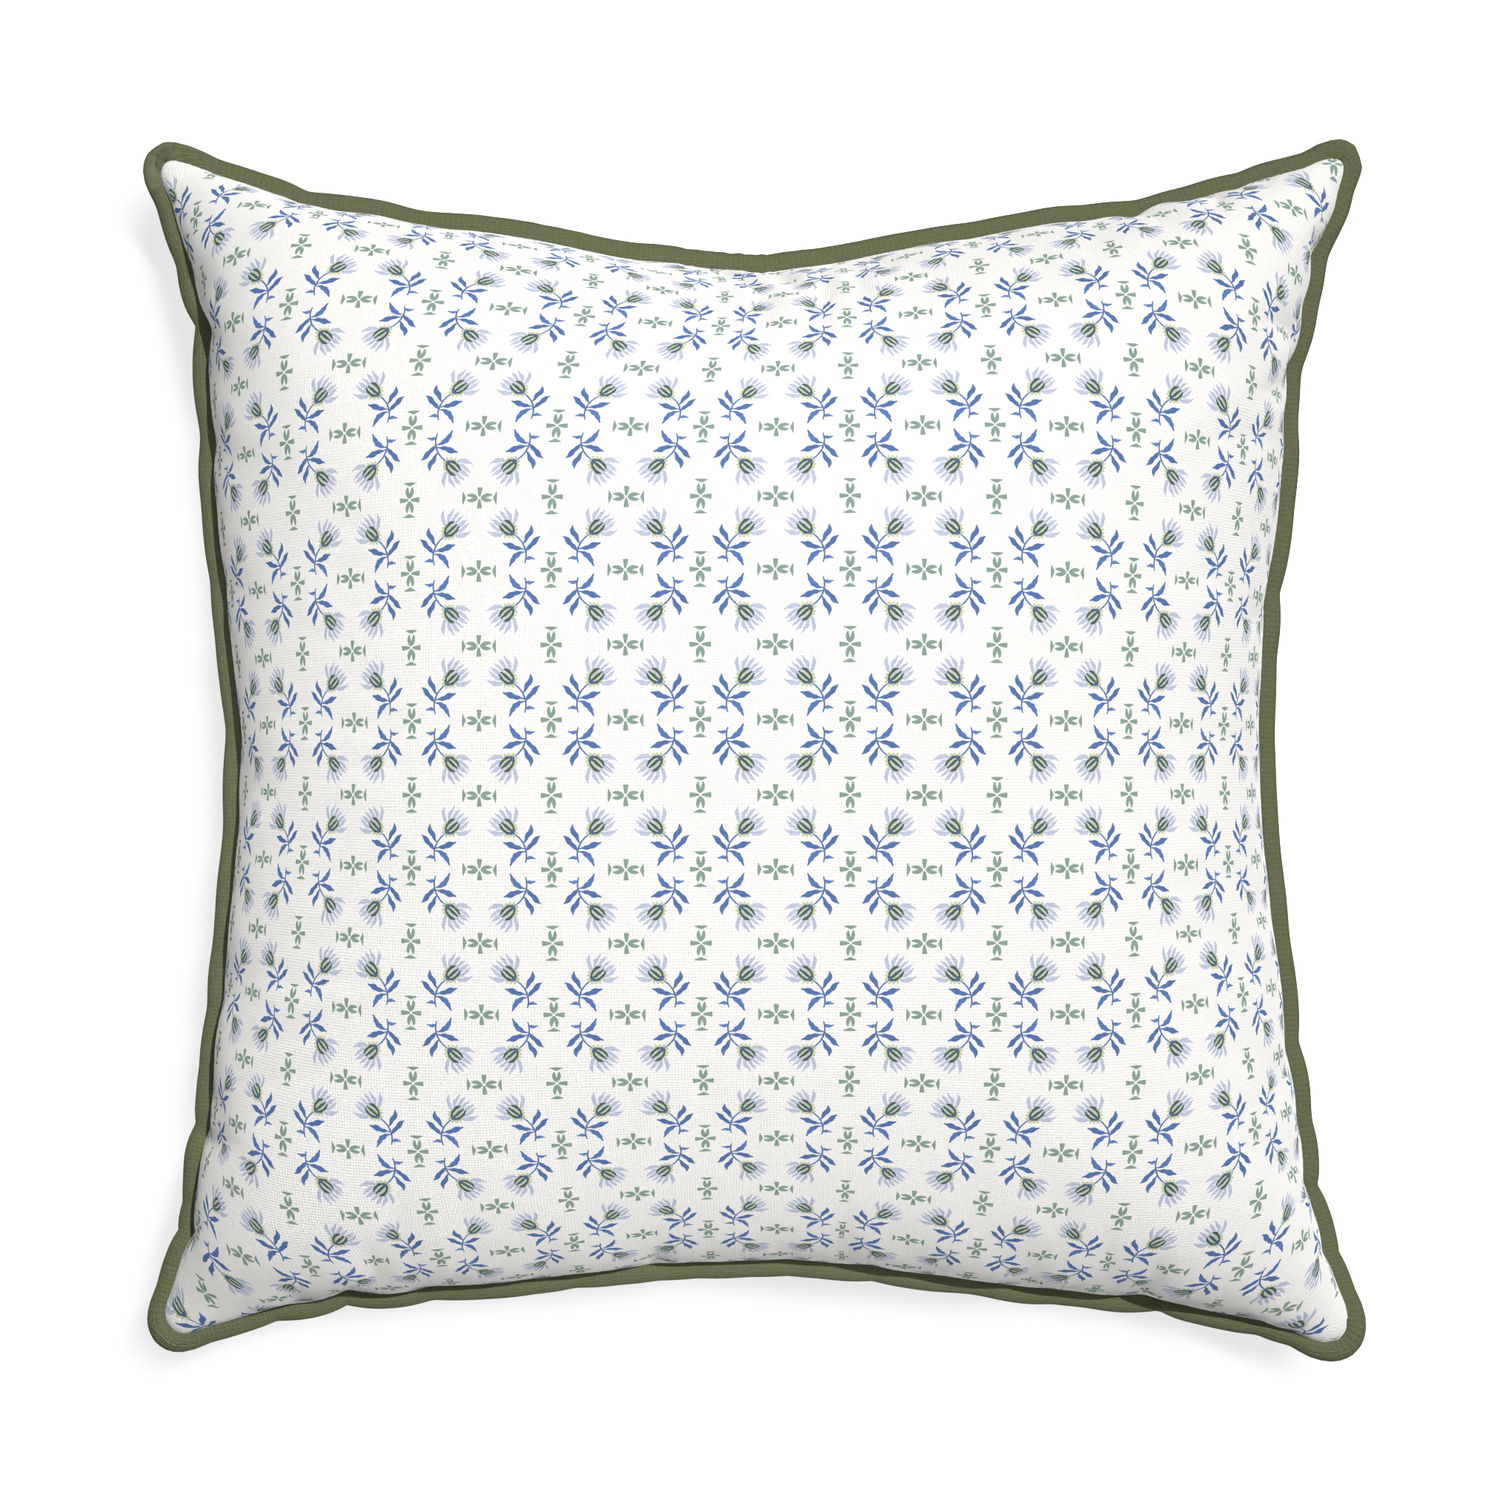 Euro-sham lee custom pillow with f piping on white background